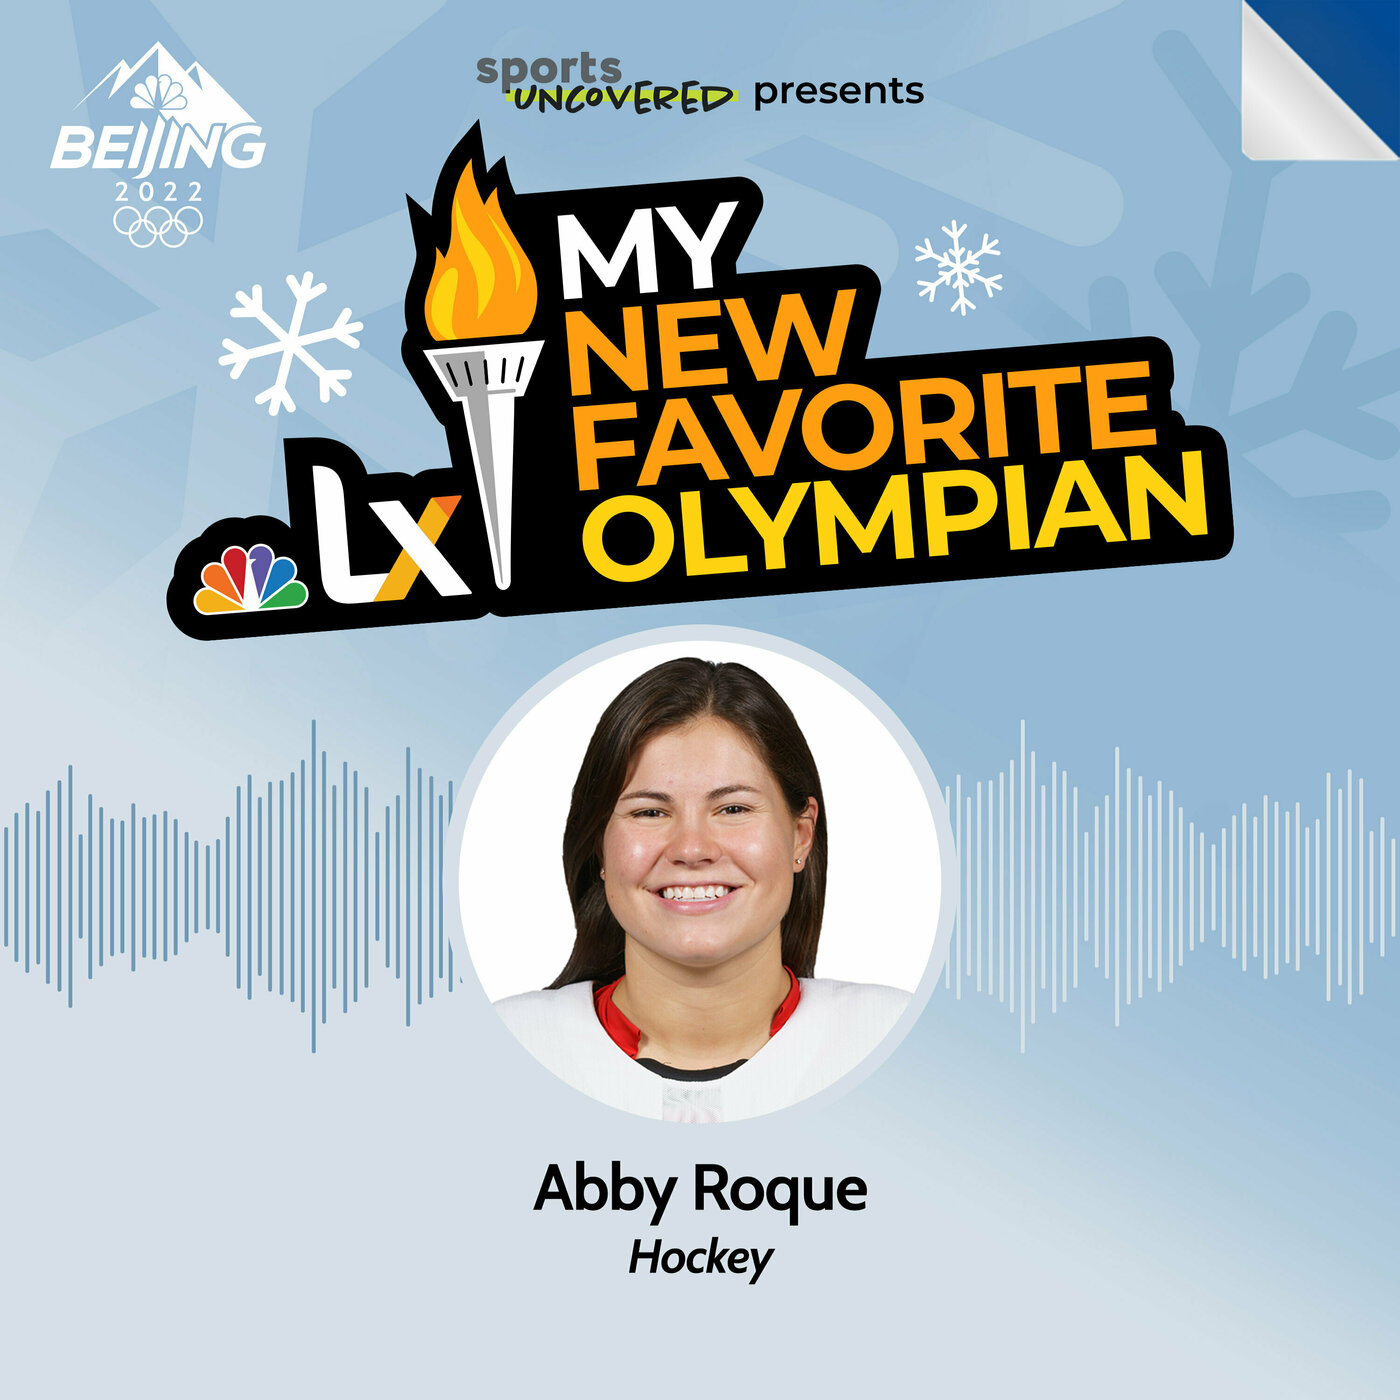 Indigenous hockey player Abby Roque competes for more than Team USA